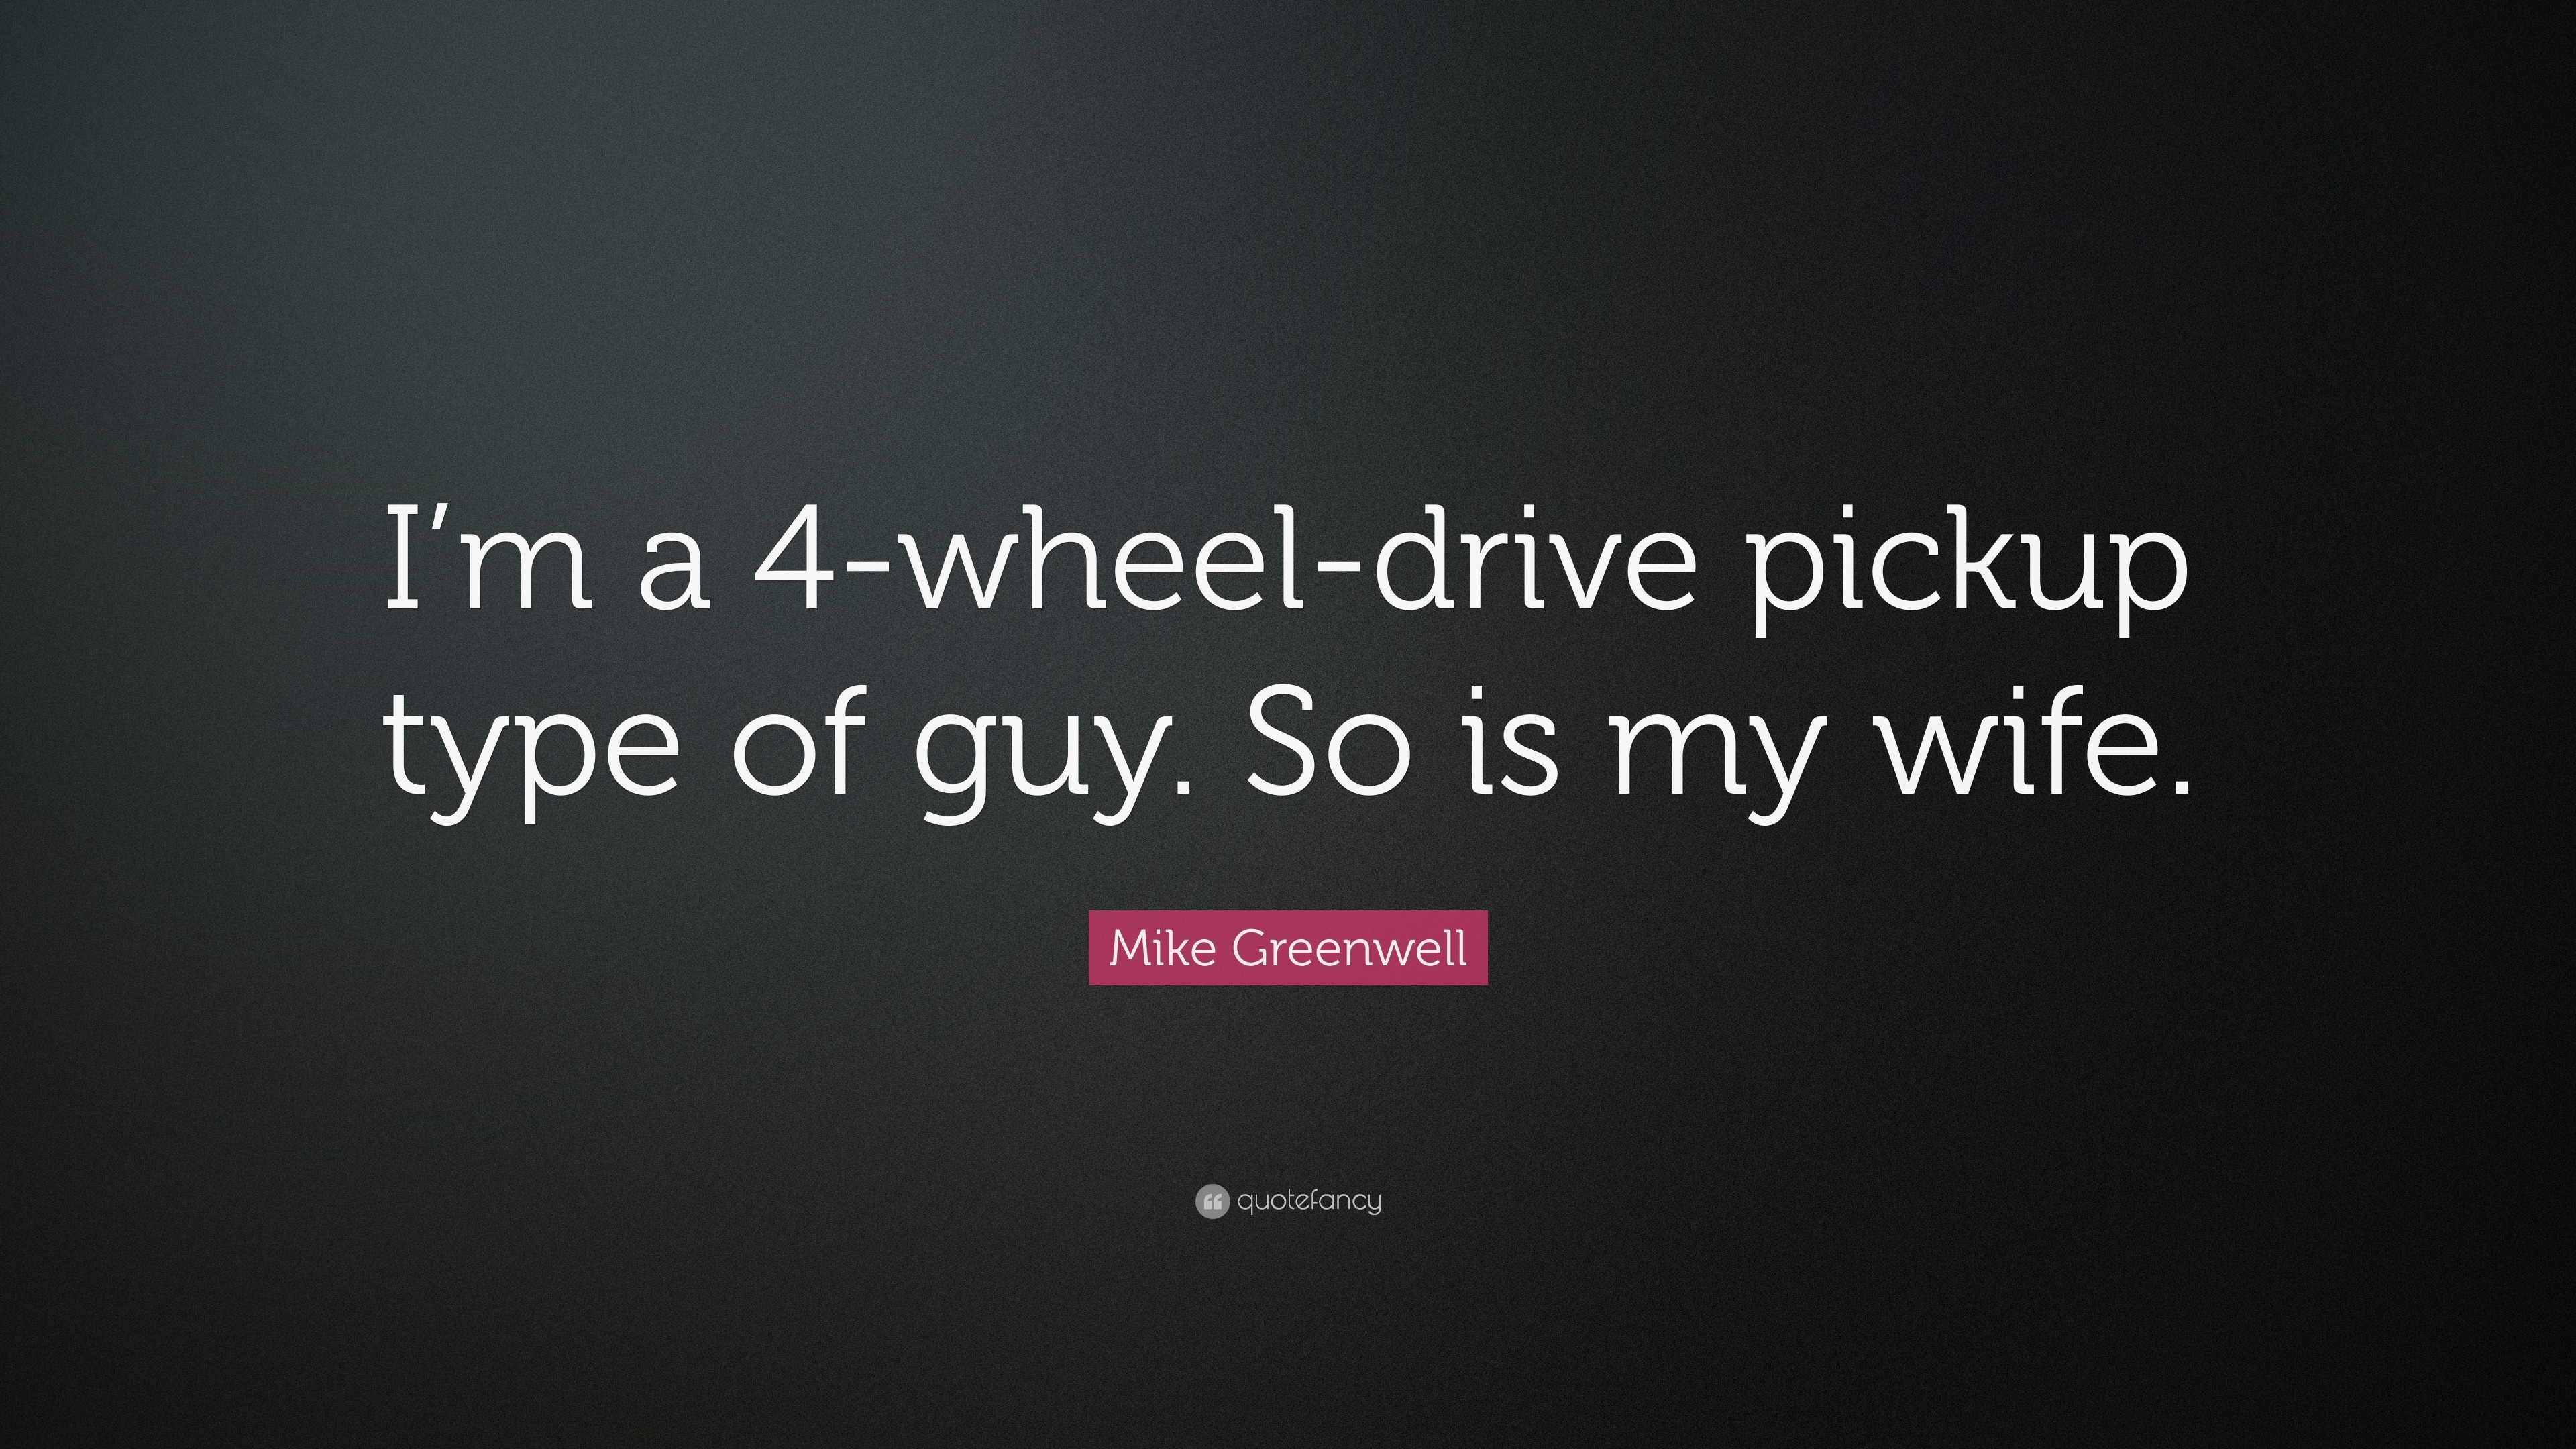 QUOTES BY MIKE GREENWELL